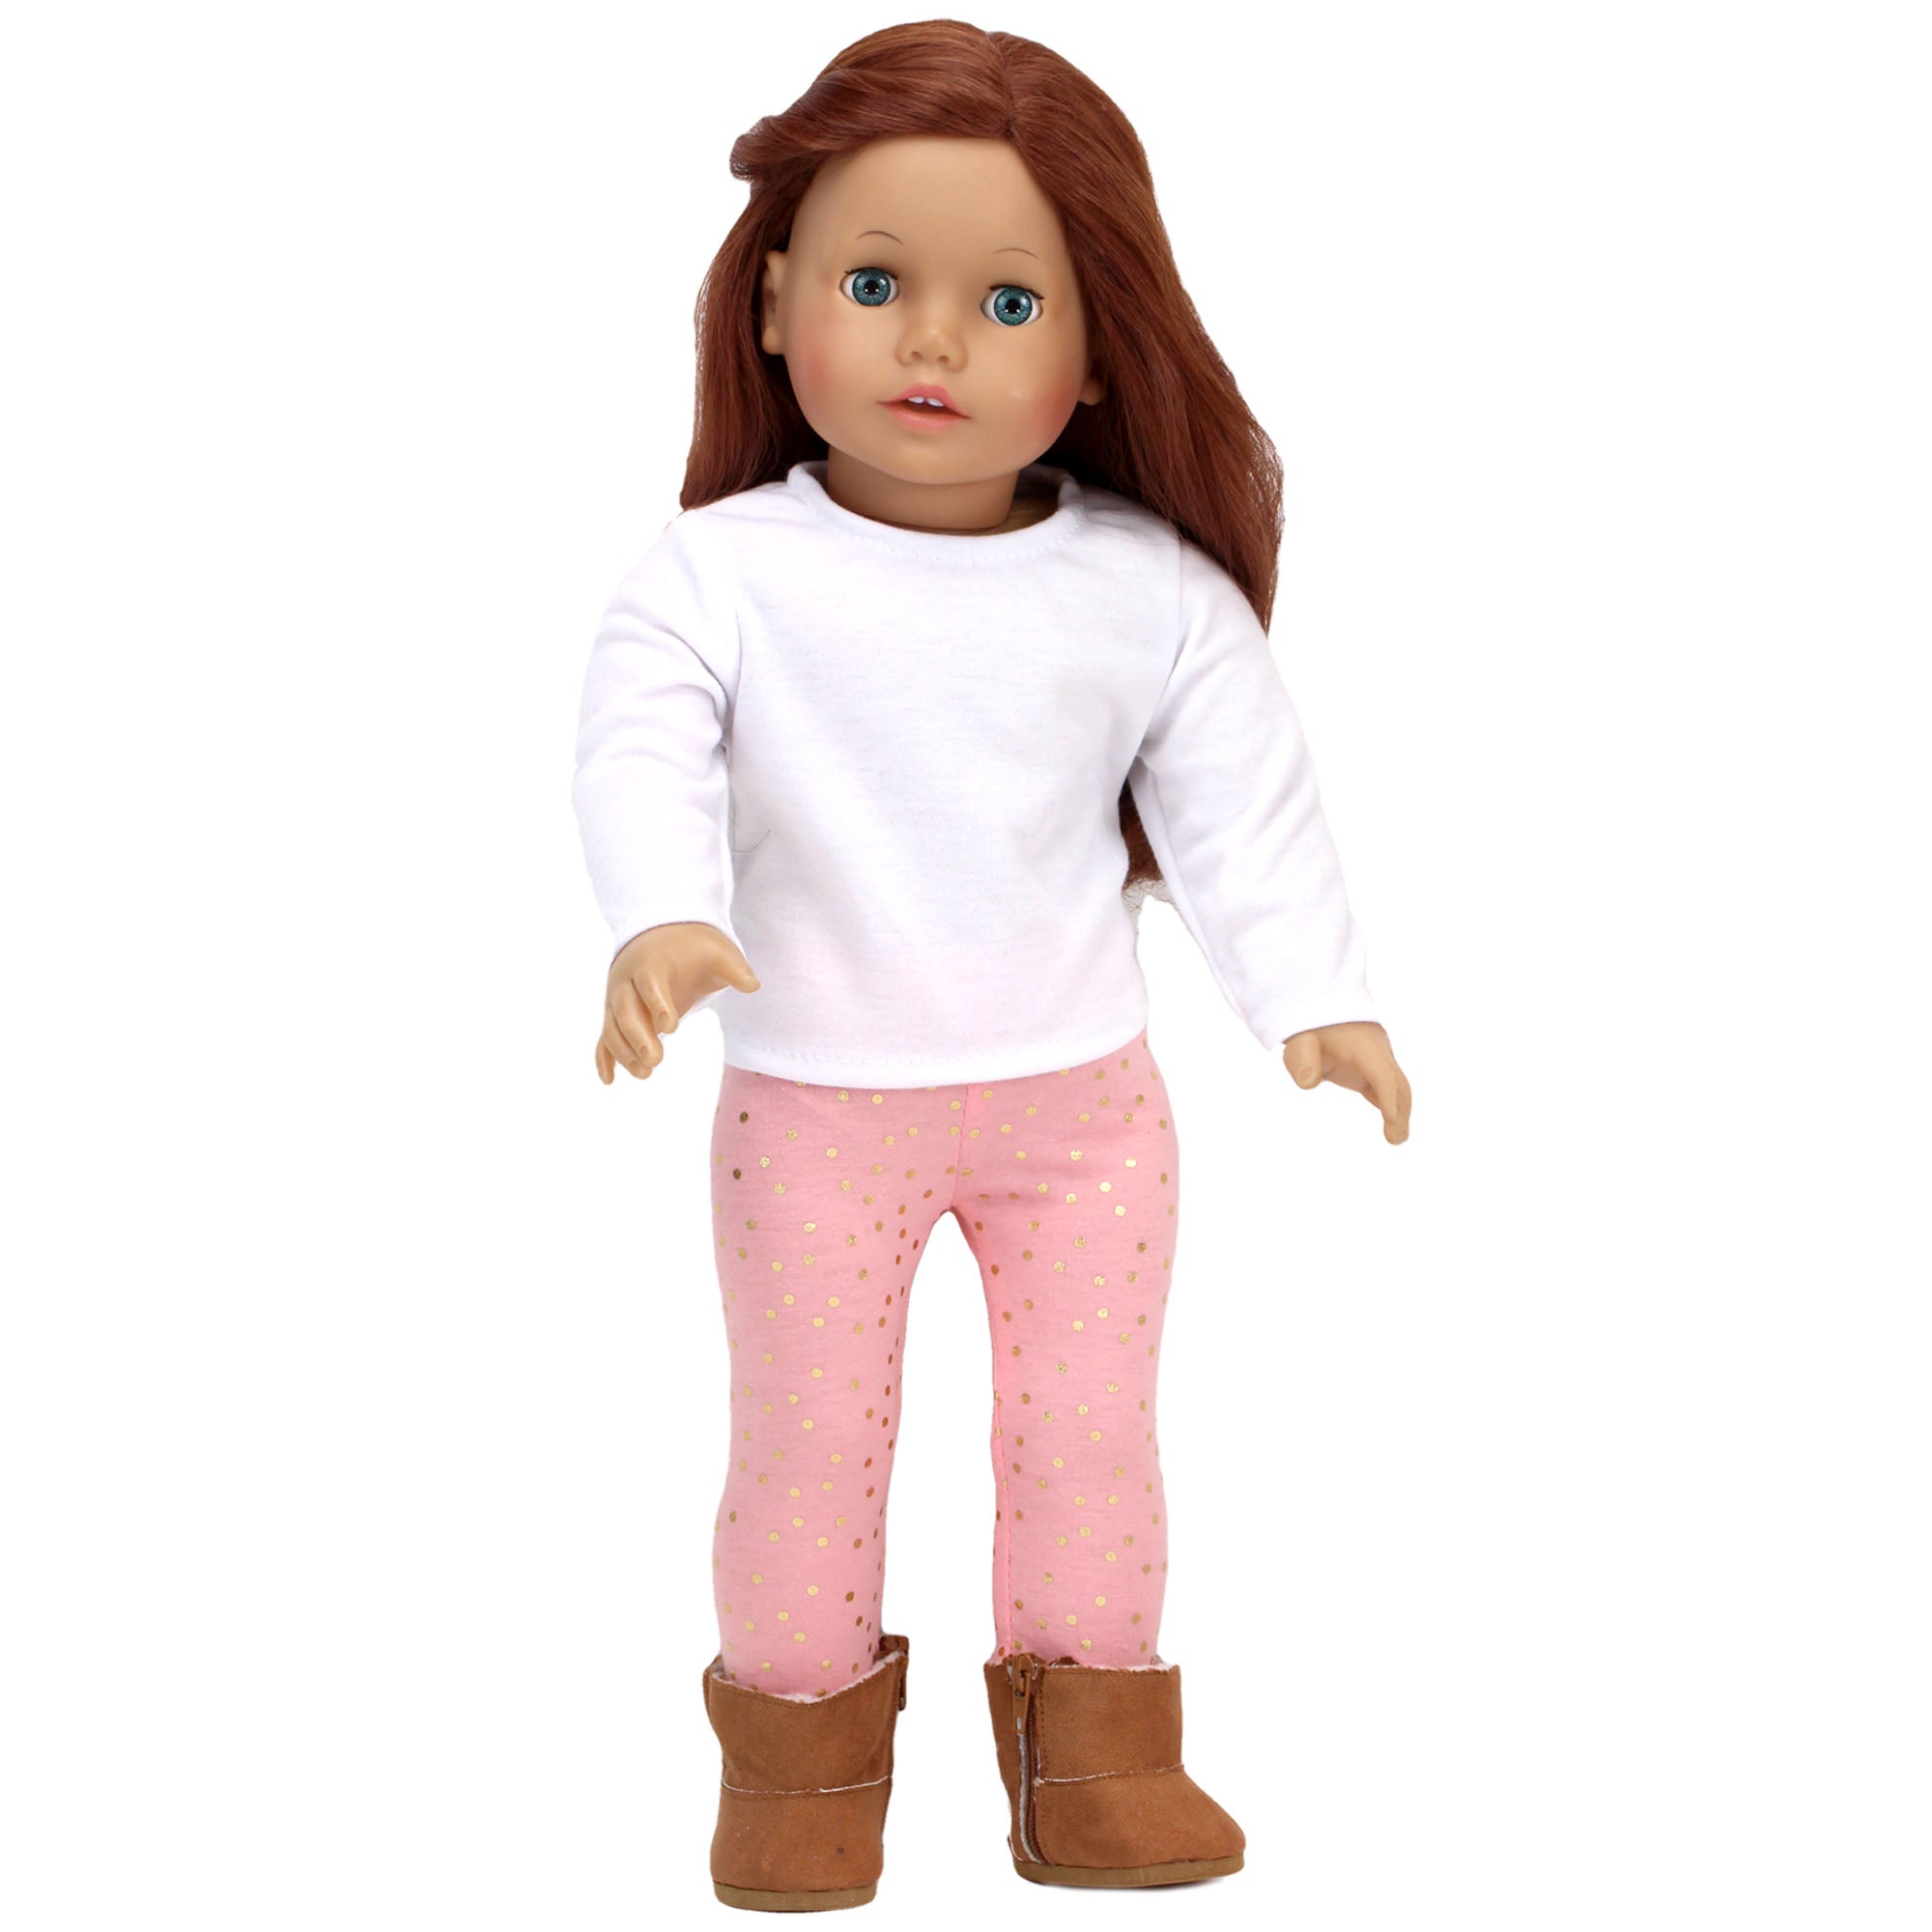 Sophia’s Metallic Zip-Up Vest, Peach Leggings with Gold Polka Dots, White Long-Sleeved T-Shirt, & Ugg-Inspired Booties Complete Outfit Set for 18” Dolls, Gold